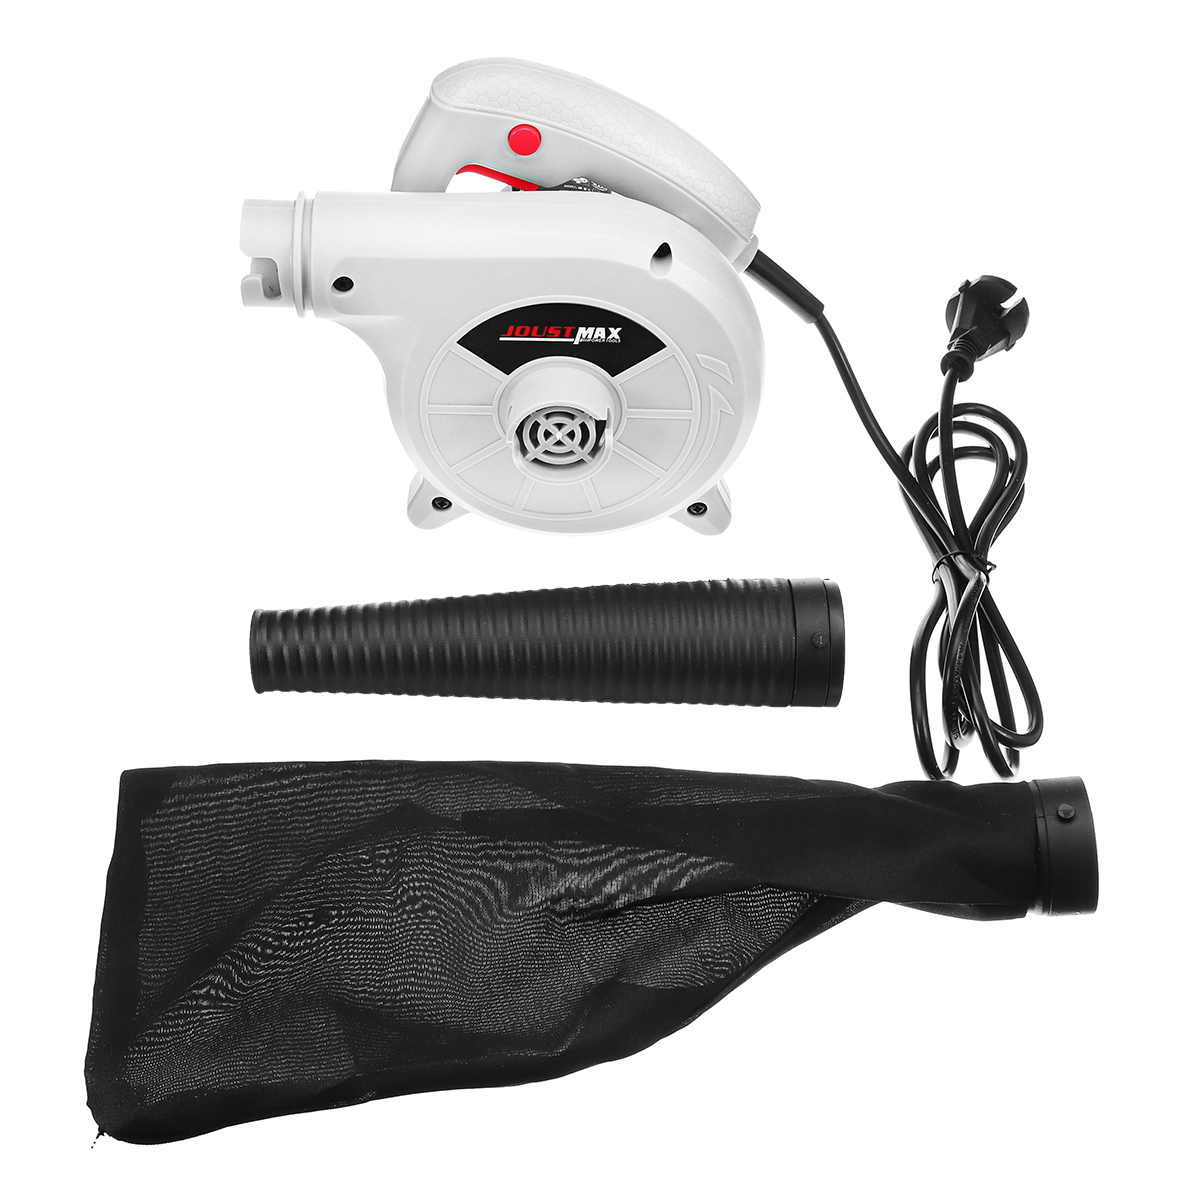 

220V 600W Electric Operated Air Blower for Cleaning Computer Dust Vacuum Cleaner